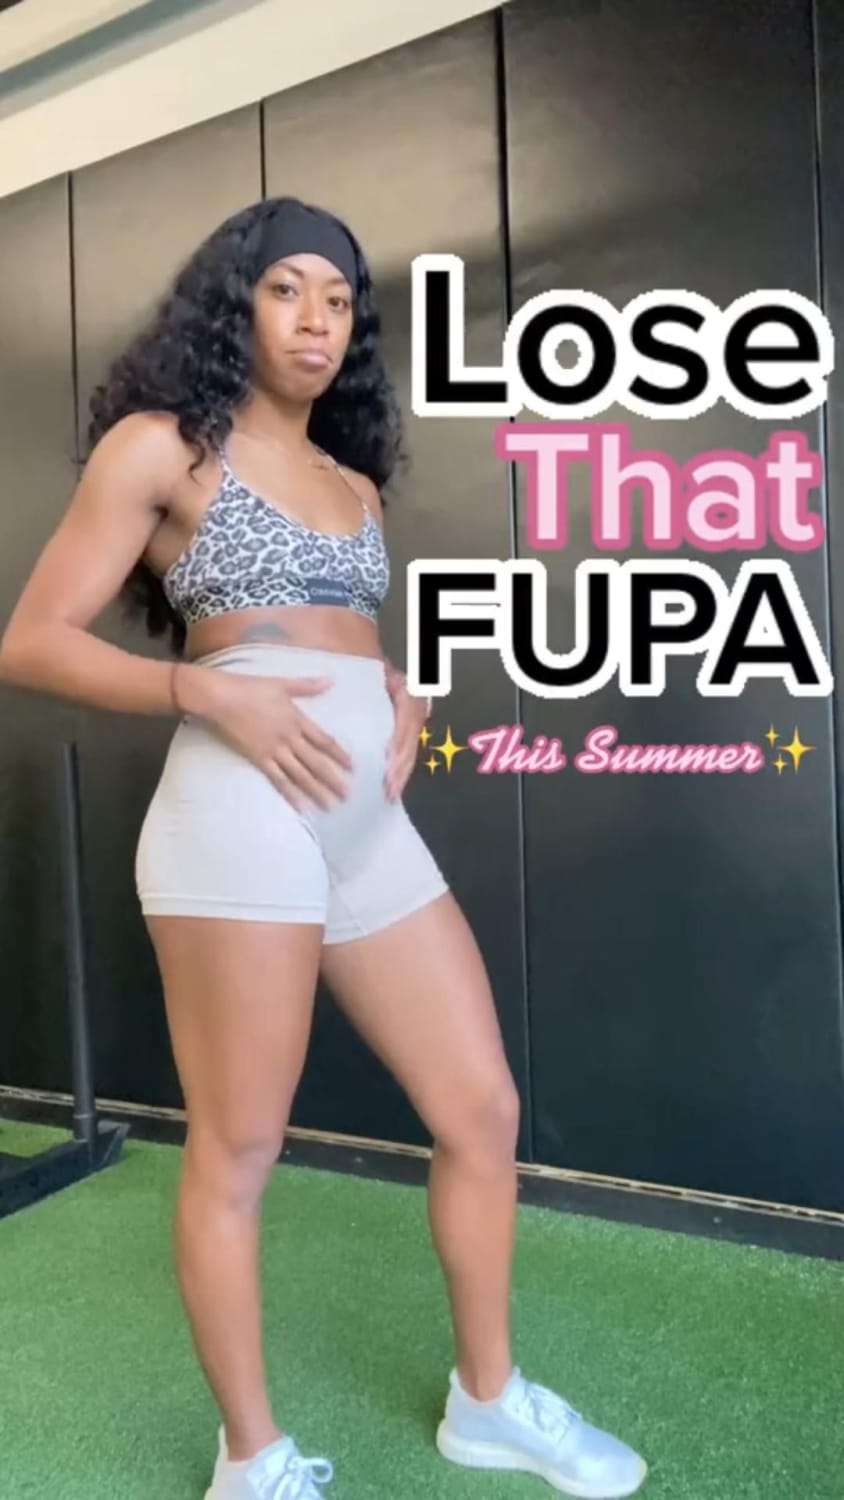 Exercises to lose your FUPA